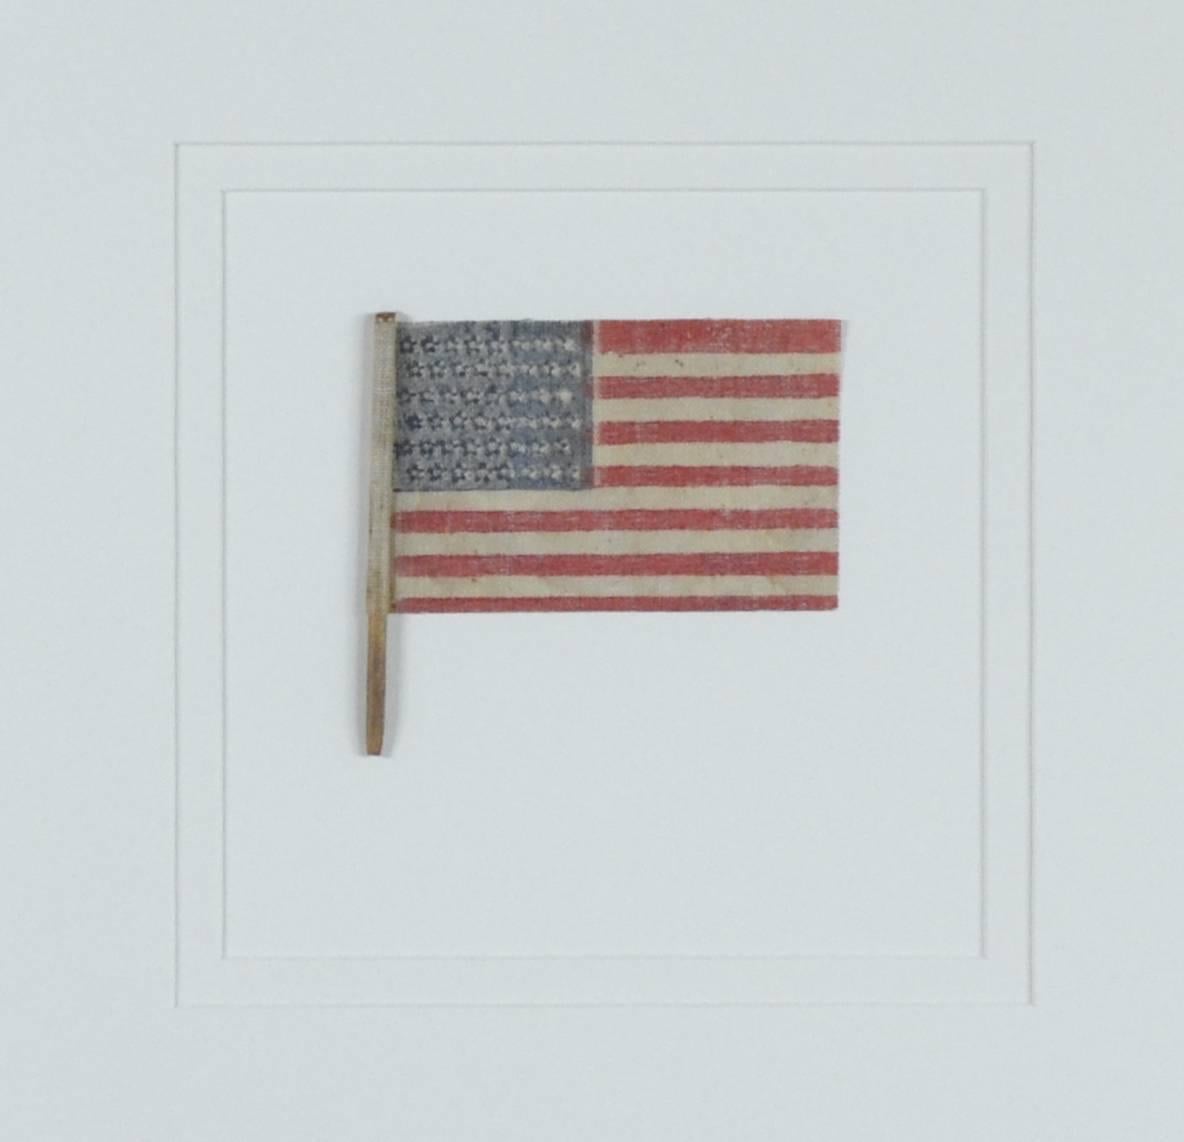 Antique 48 star flag 1912-1914. This star arrangement was only used for two years. Starched gauze fabric.
Museum framing with UV acrylic
#10672c
Historical Americana.